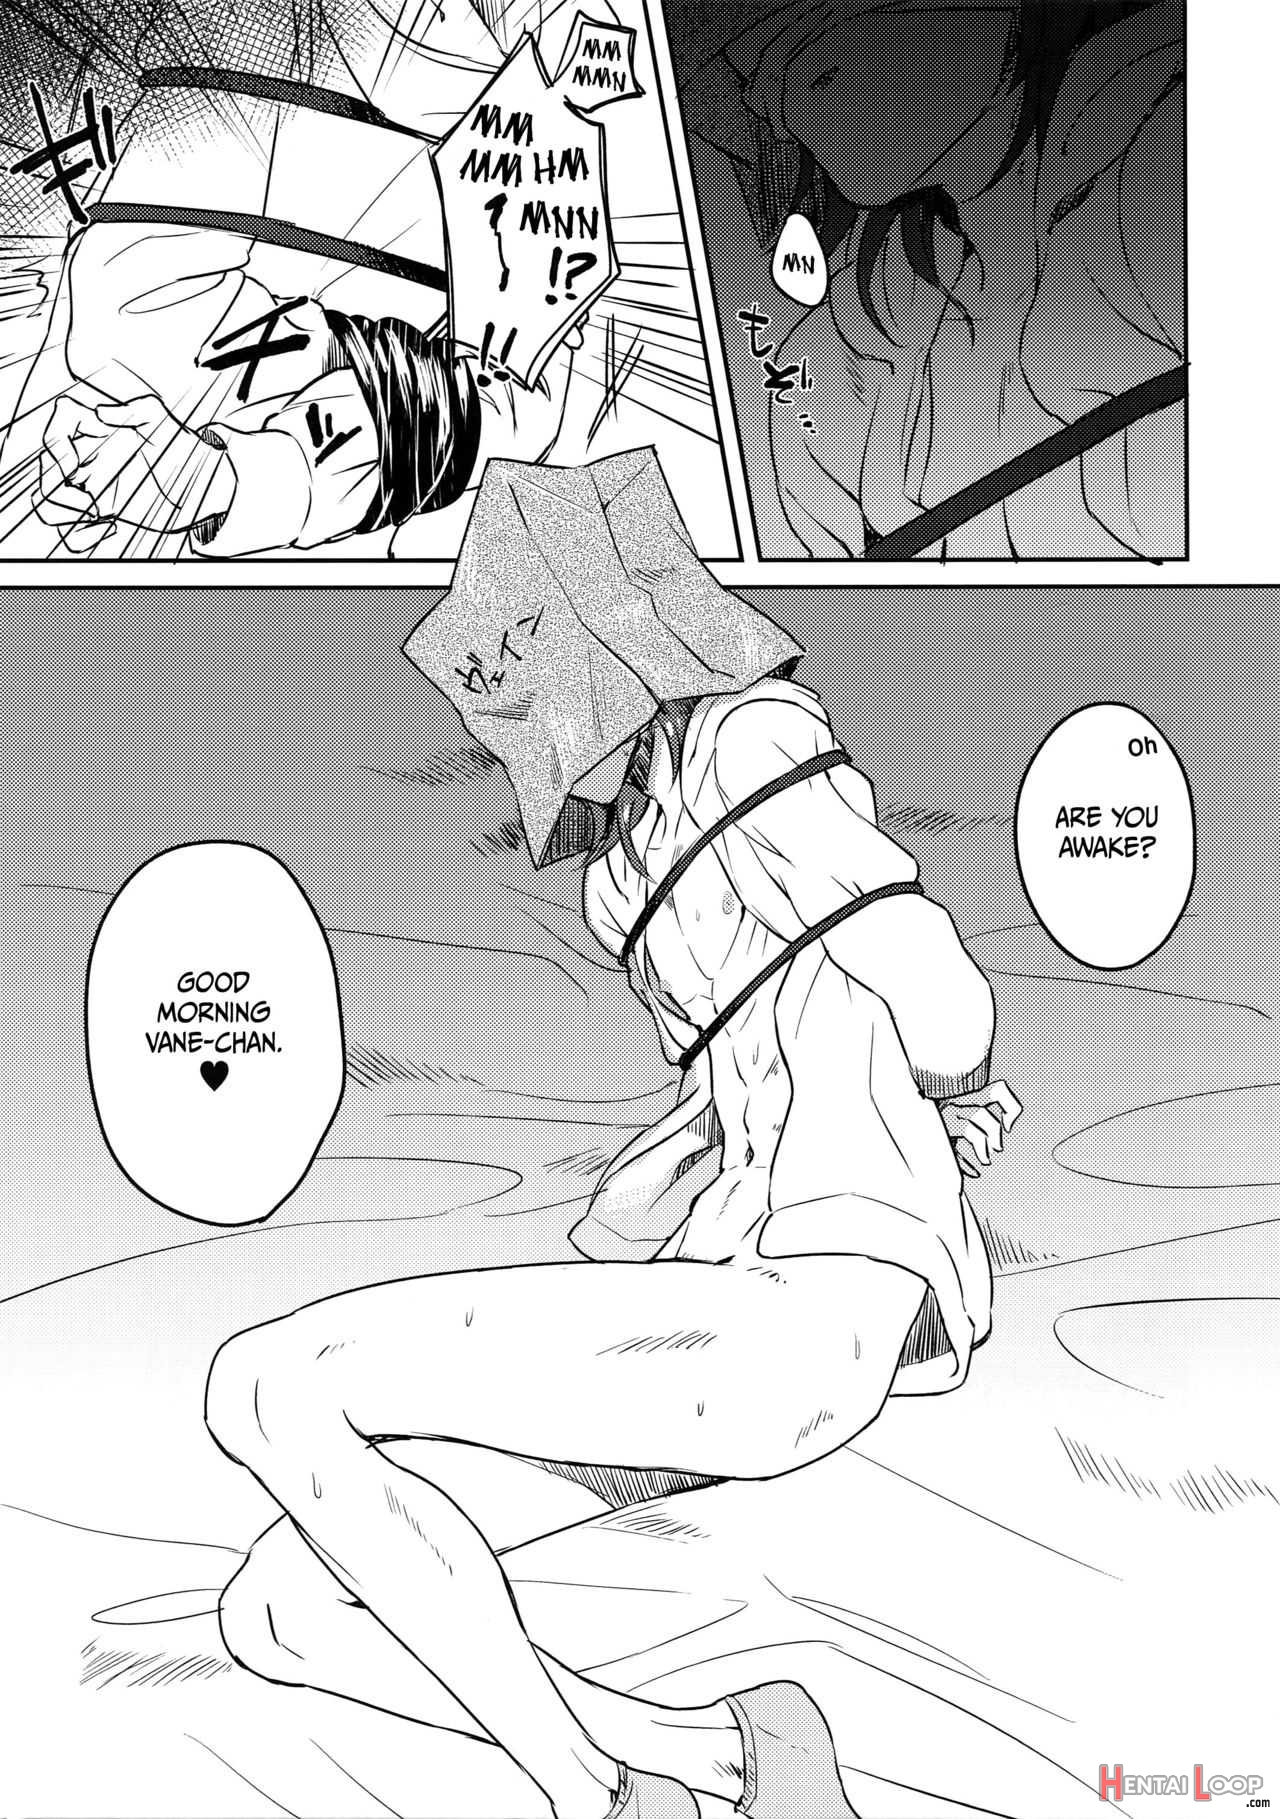 Vane-chan To page 2